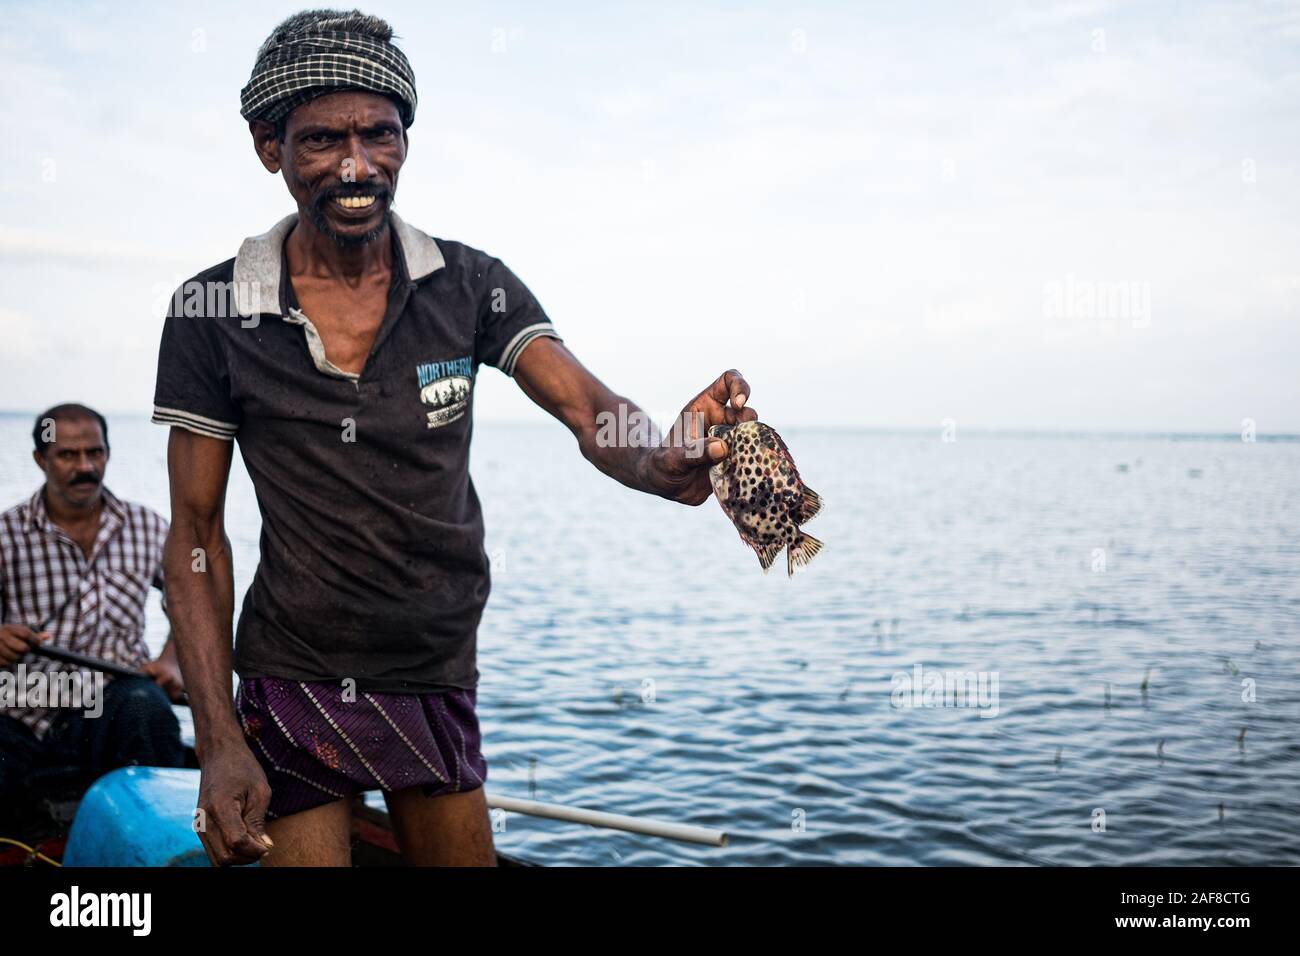 Vembanad lake, Kerala - 20 october 2019: portrait of an indian fisherman on a boat fishing and showing fish, a symbol of indian economy and food crisi Stock Photo